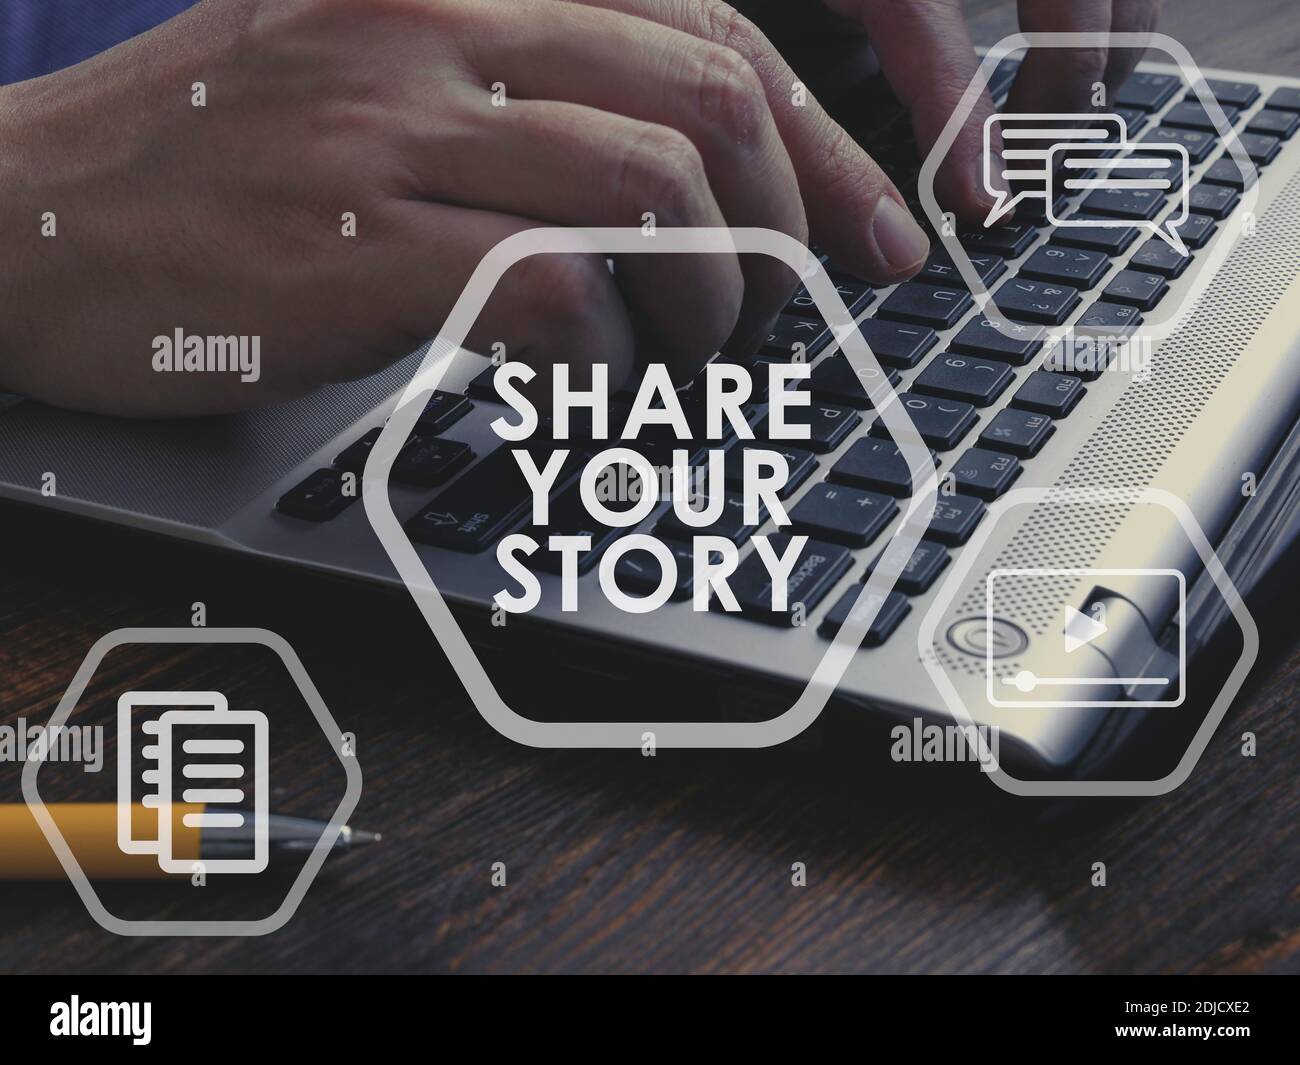 Share your story concept. Man typing on the keyboard. Stock Photo